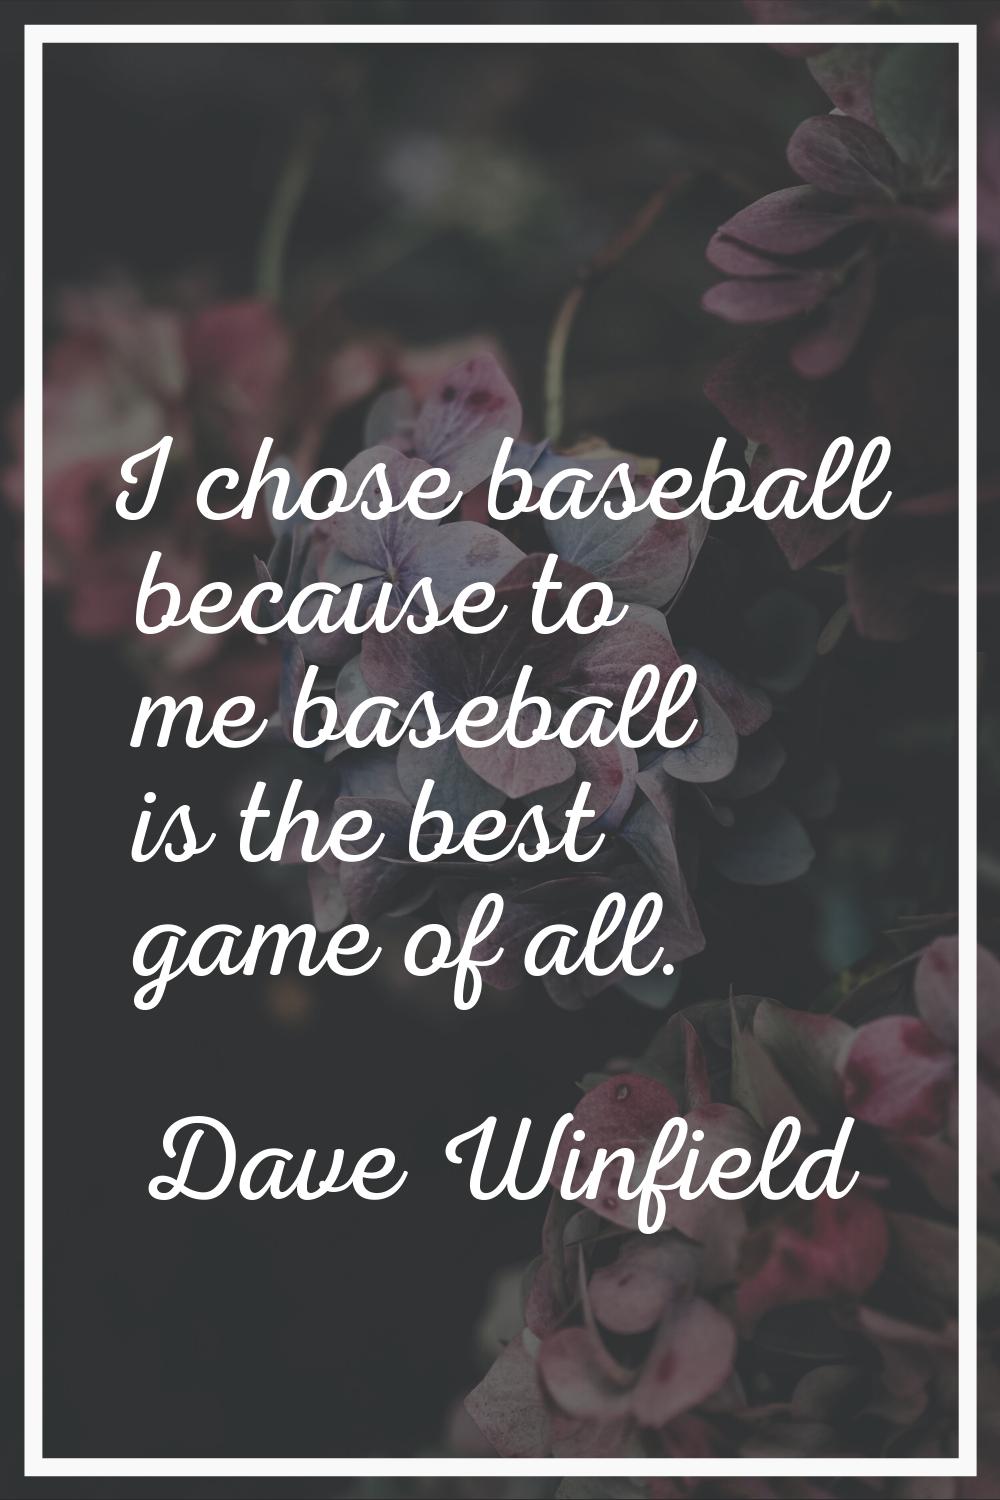 I chose baseball because to me baseball is the best game of all.